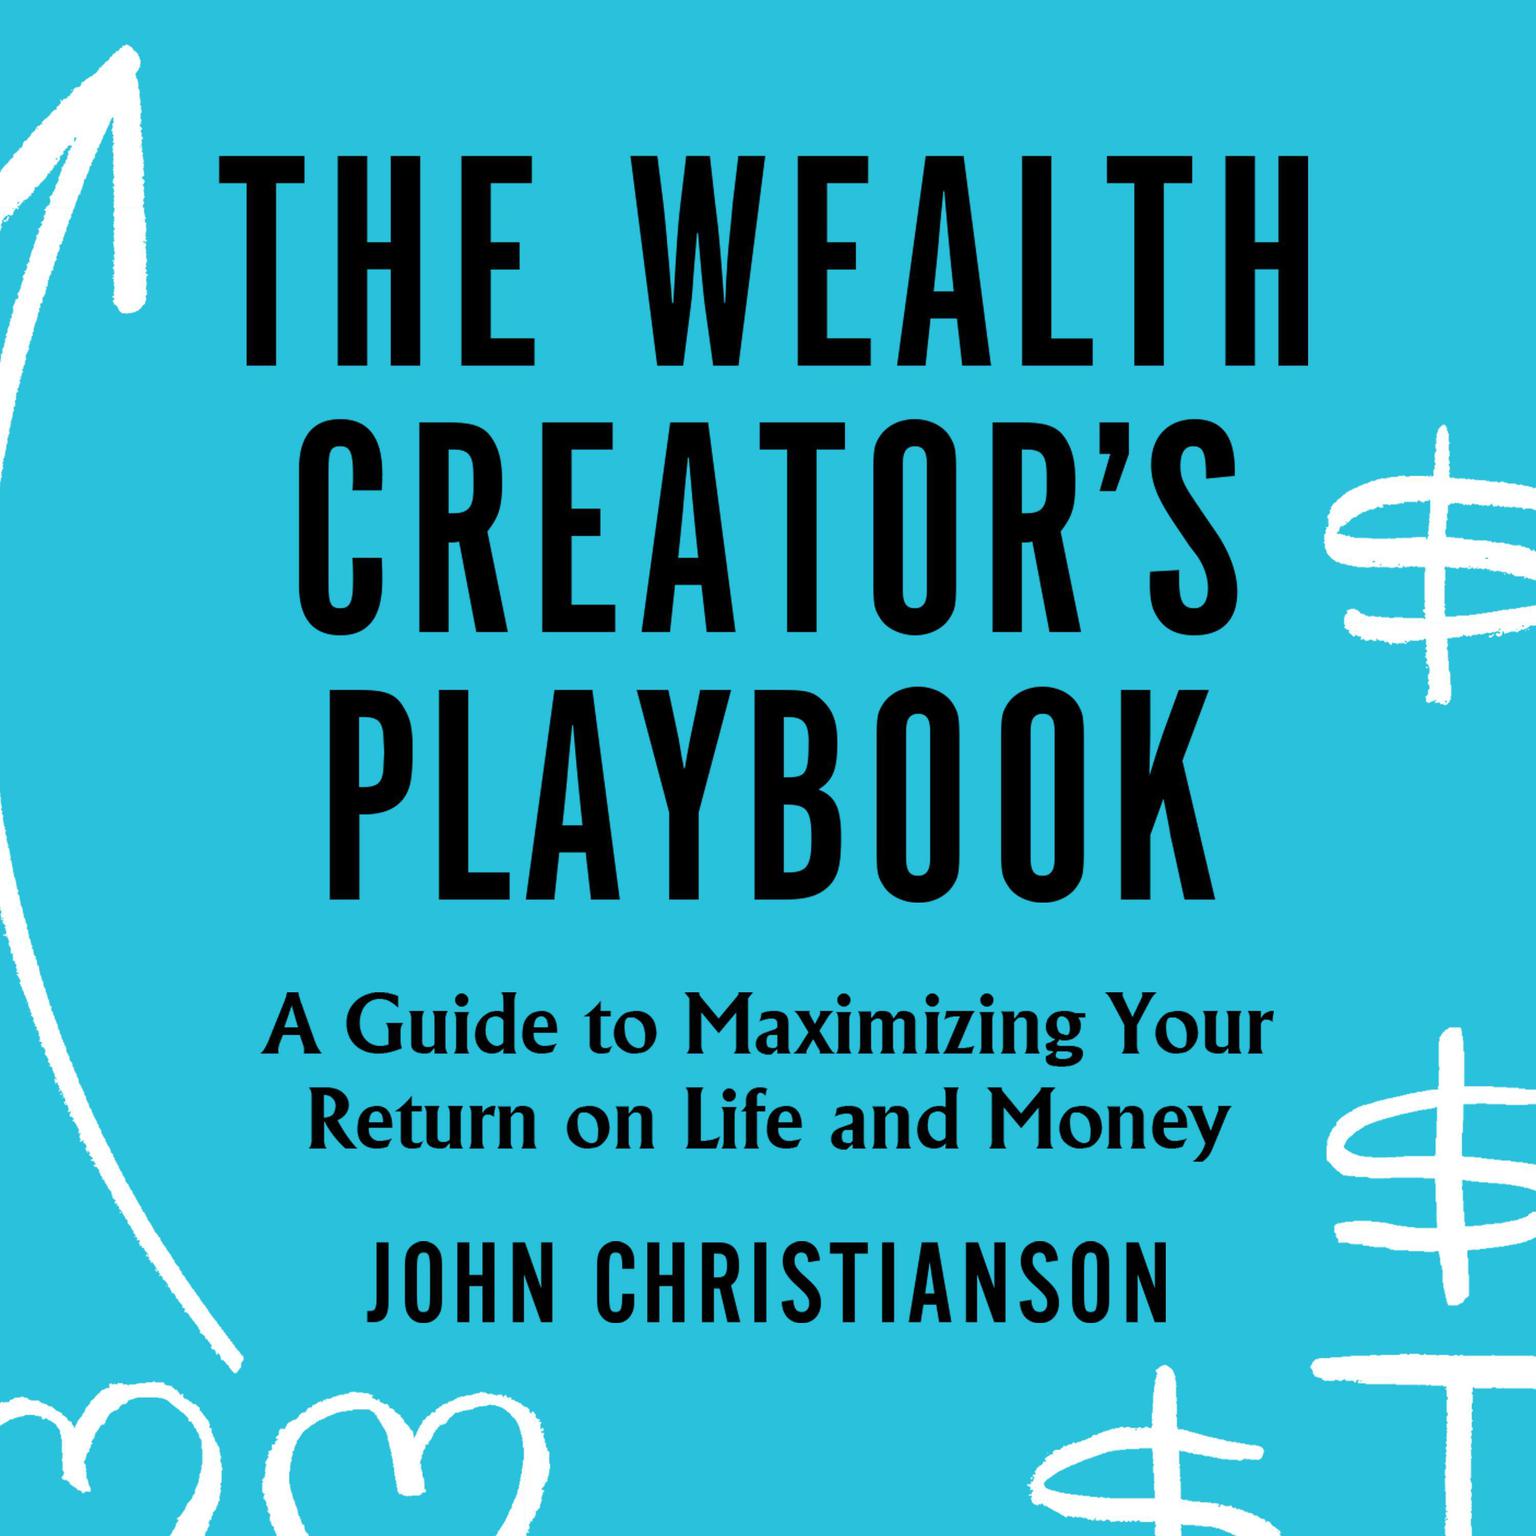 The Wealth Creators Playbook: A Guide to Maximizing Your Return on Life and Money Audiobook, by John Christianson